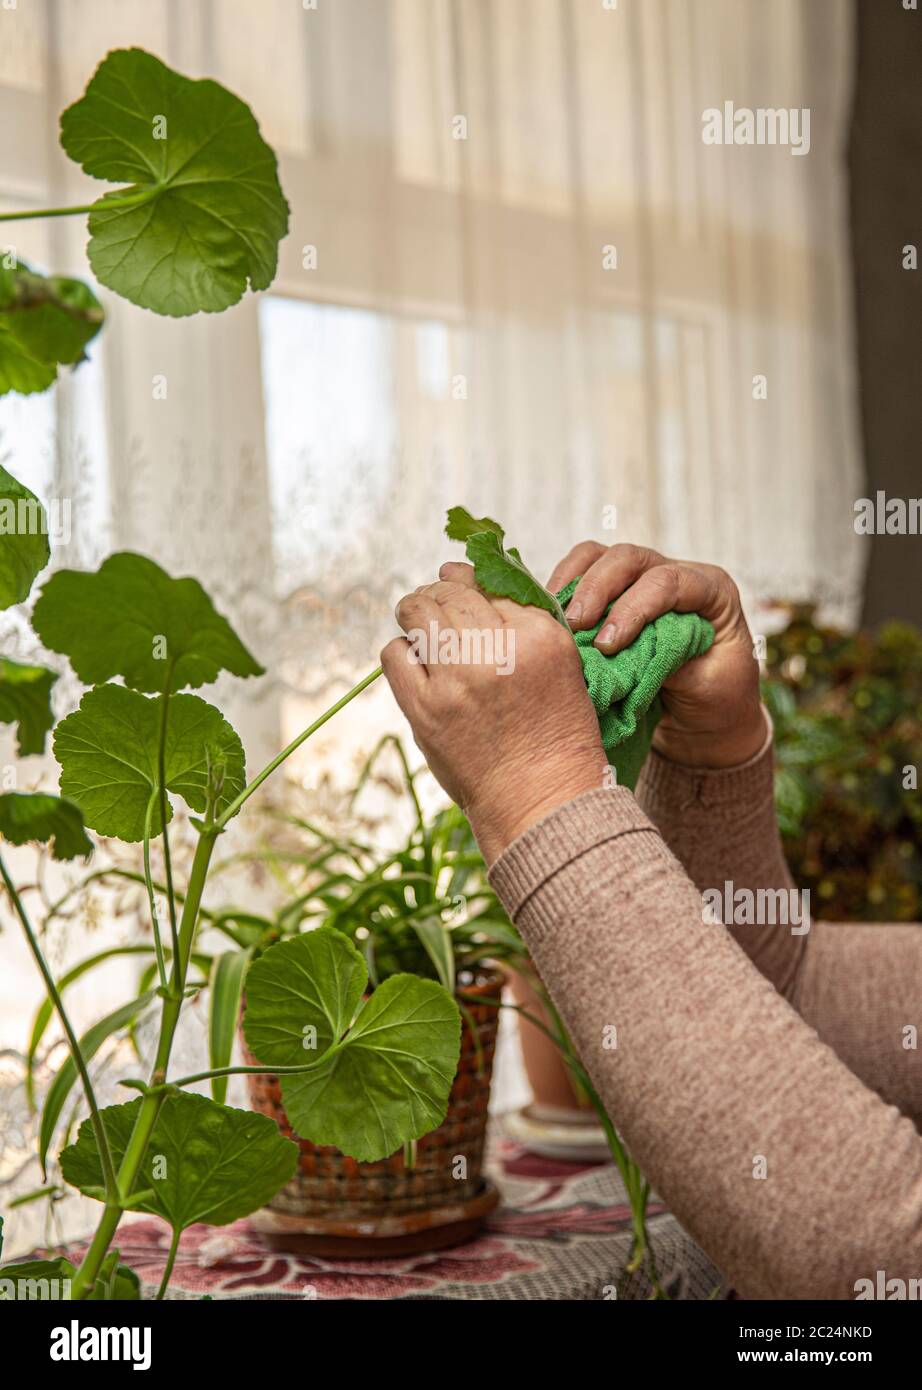 A person cleaning house plants in the room Stock Photo